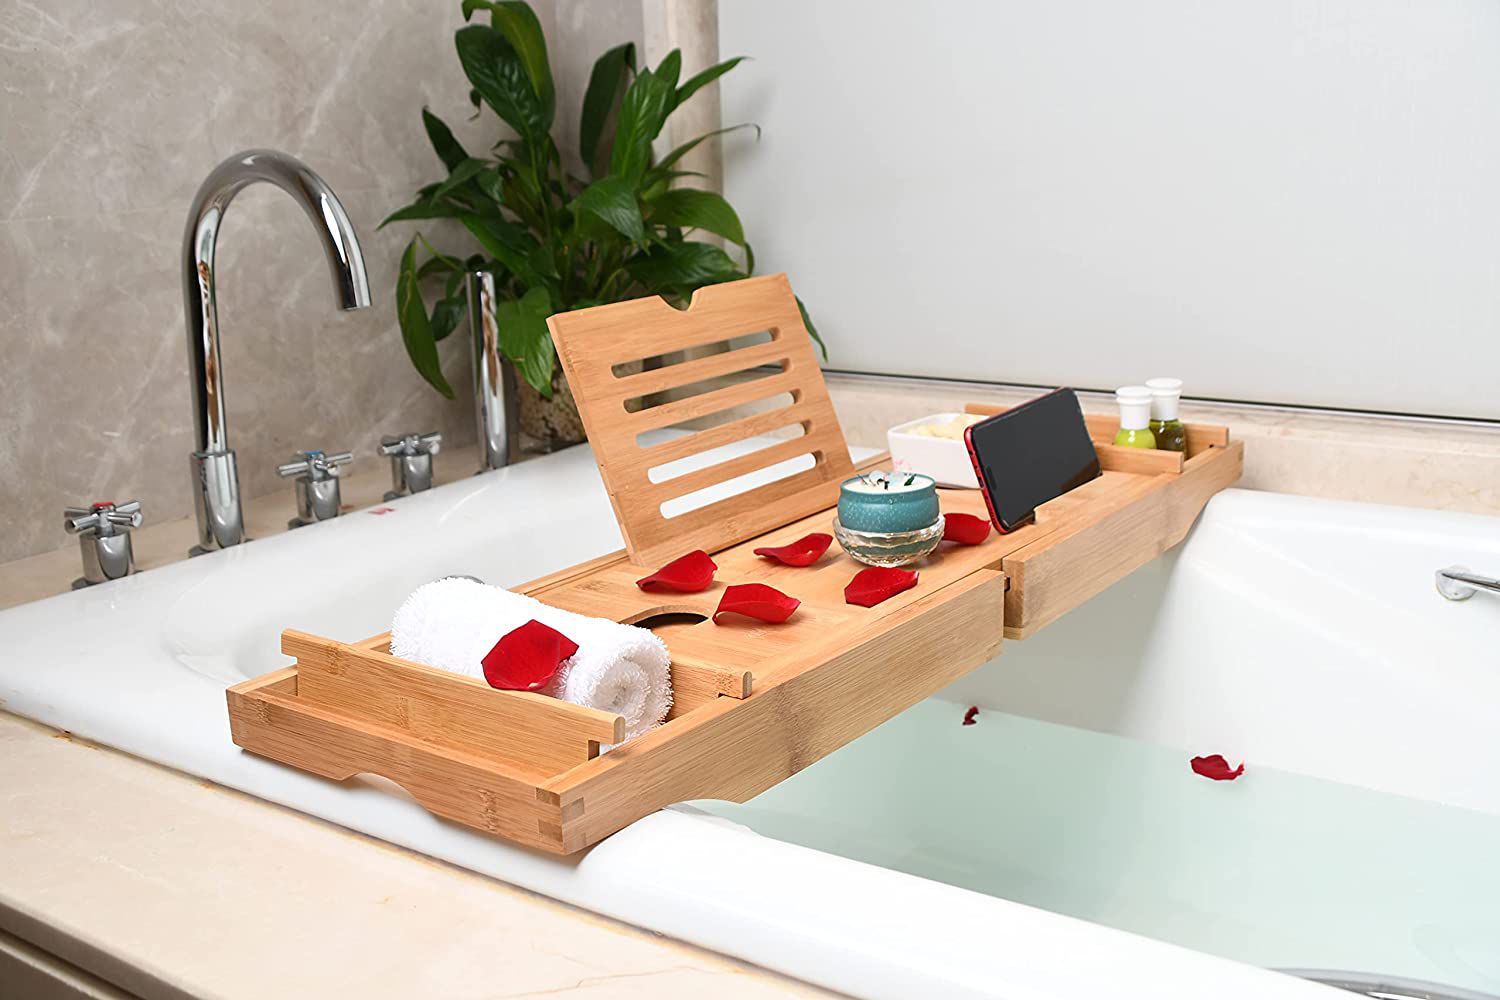 What is the Best Wood for Bathtub Tray